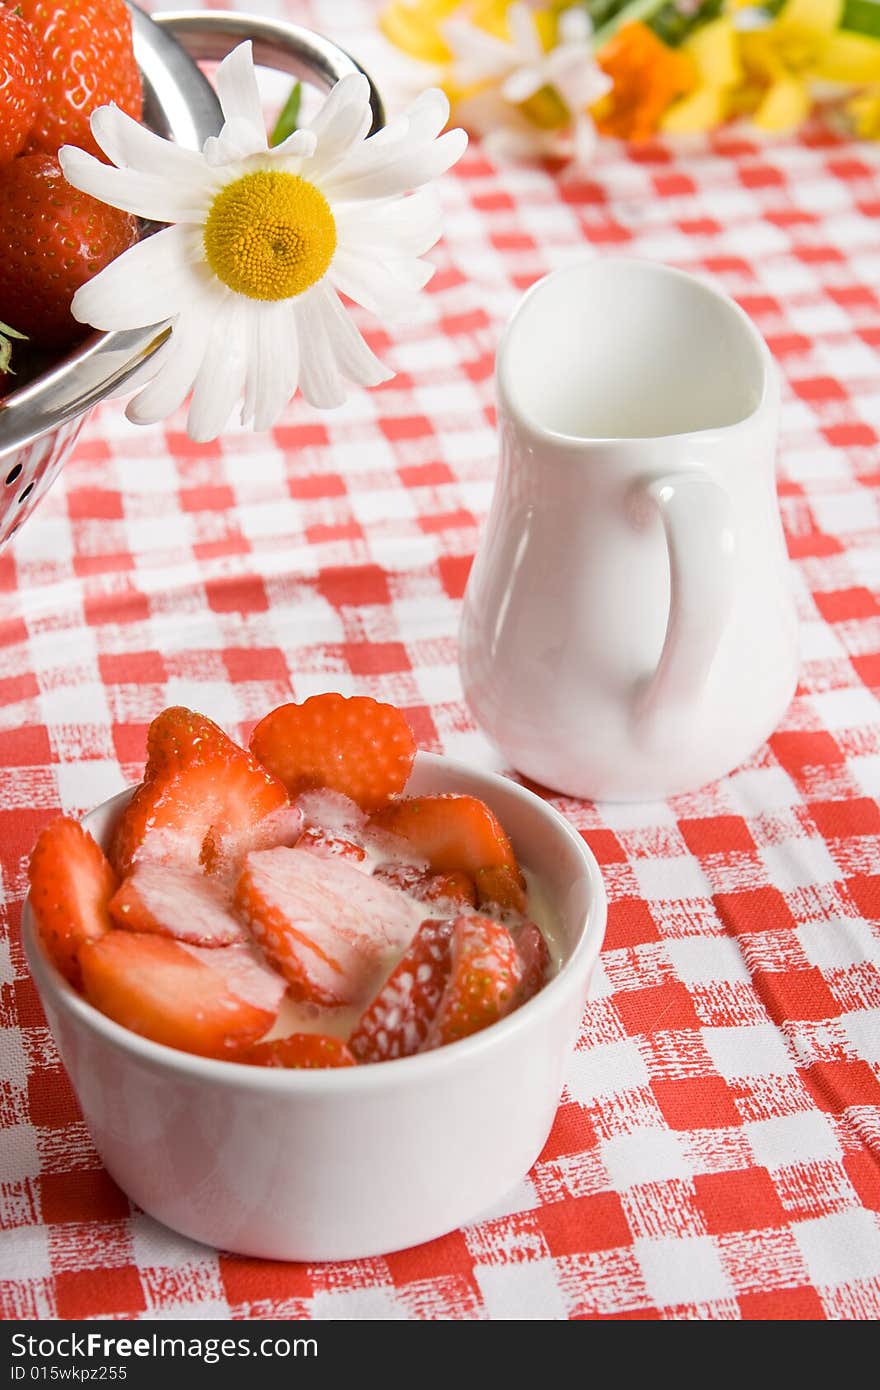 Sliced strawberries and cream in a white pot with a daisy on a red and white cloth